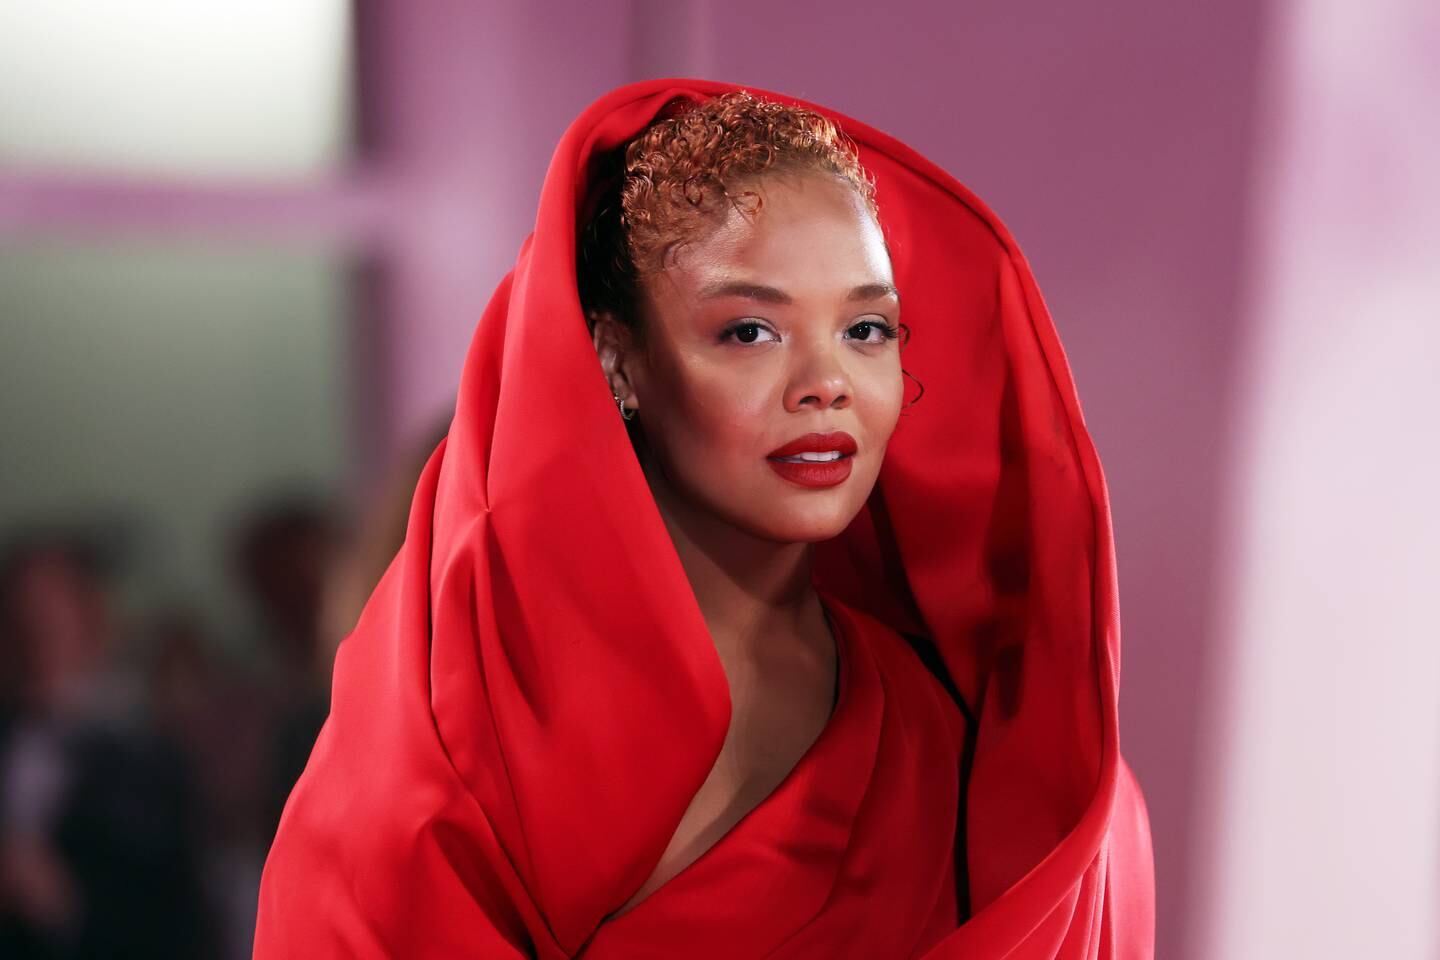 Tessa Thompson went for head-to-toe red in this dramatic hooded look by Elie Saab. The British actress even dyed her hair to match. Getty Images